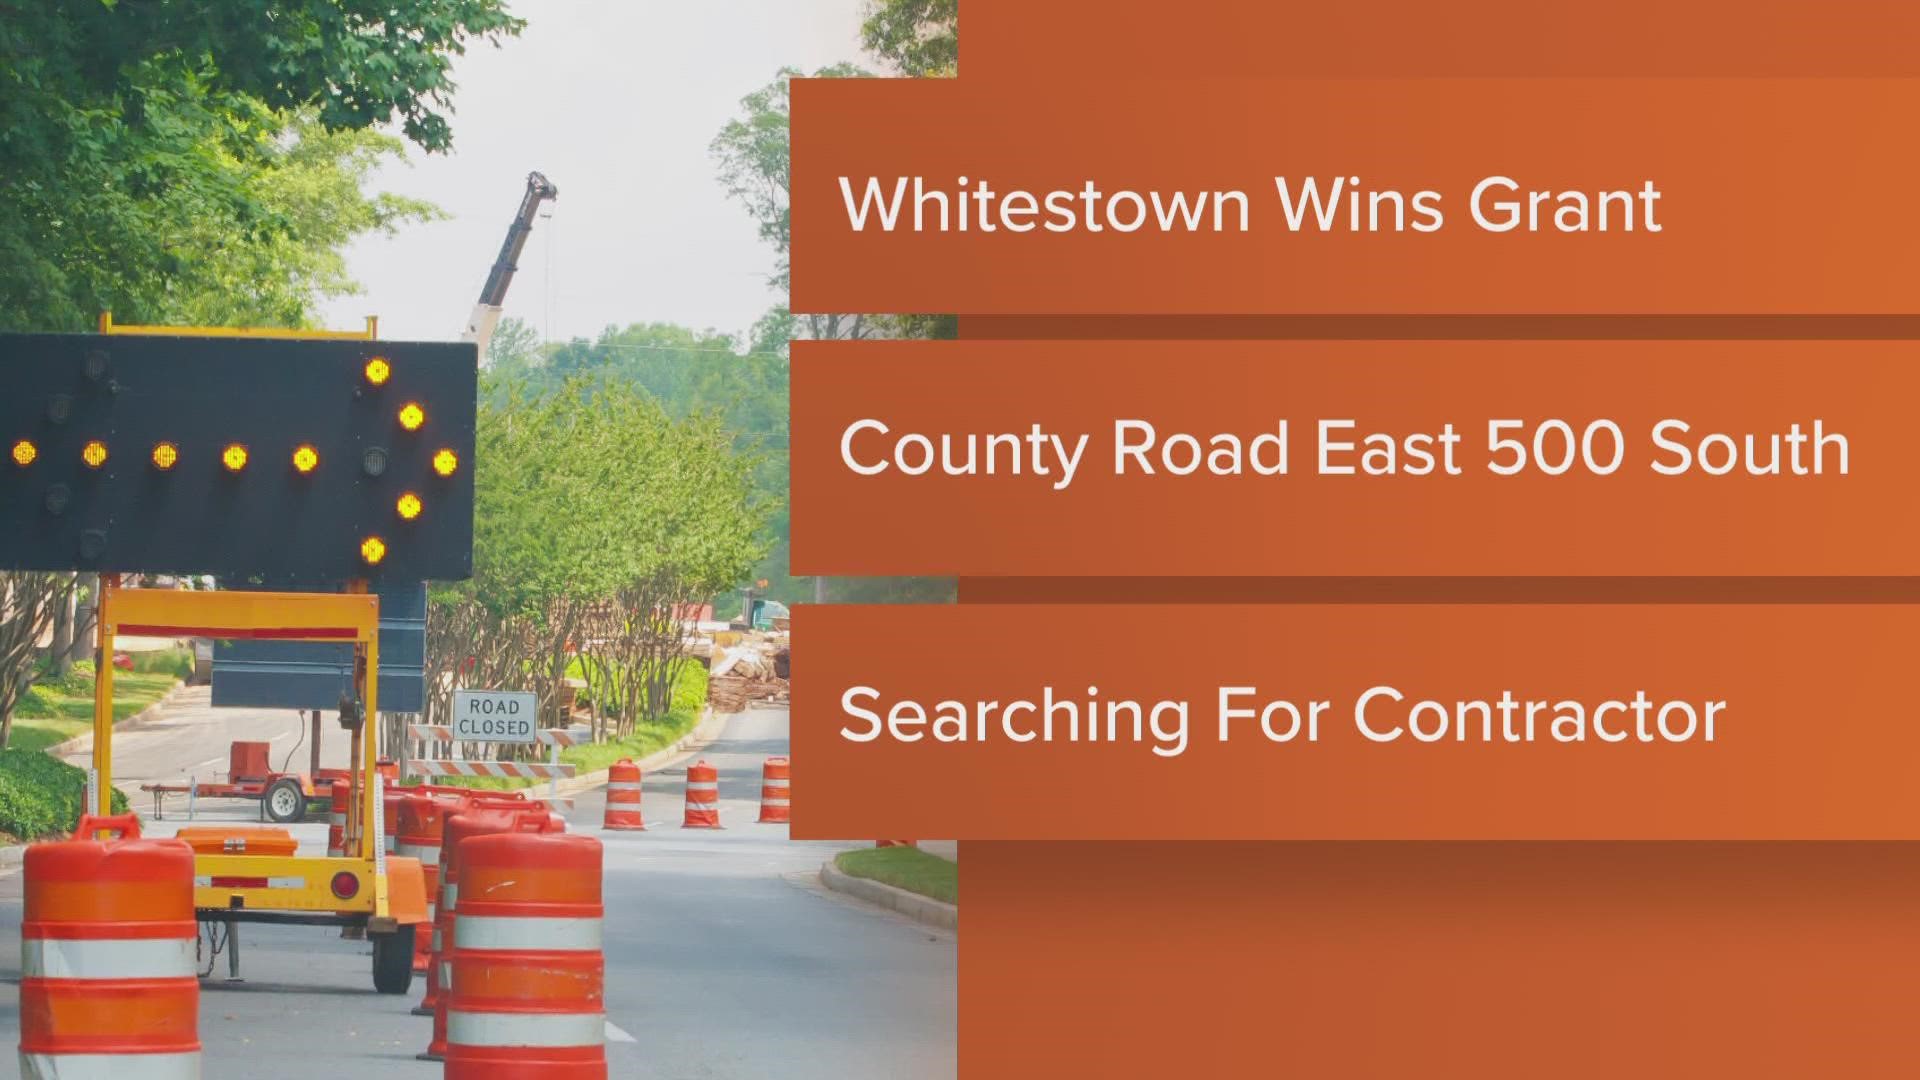 Whitestown is getting more than $500,000 from INDOT to improve a road that stretches from Main Street in Whitestown to County Road 575 East.